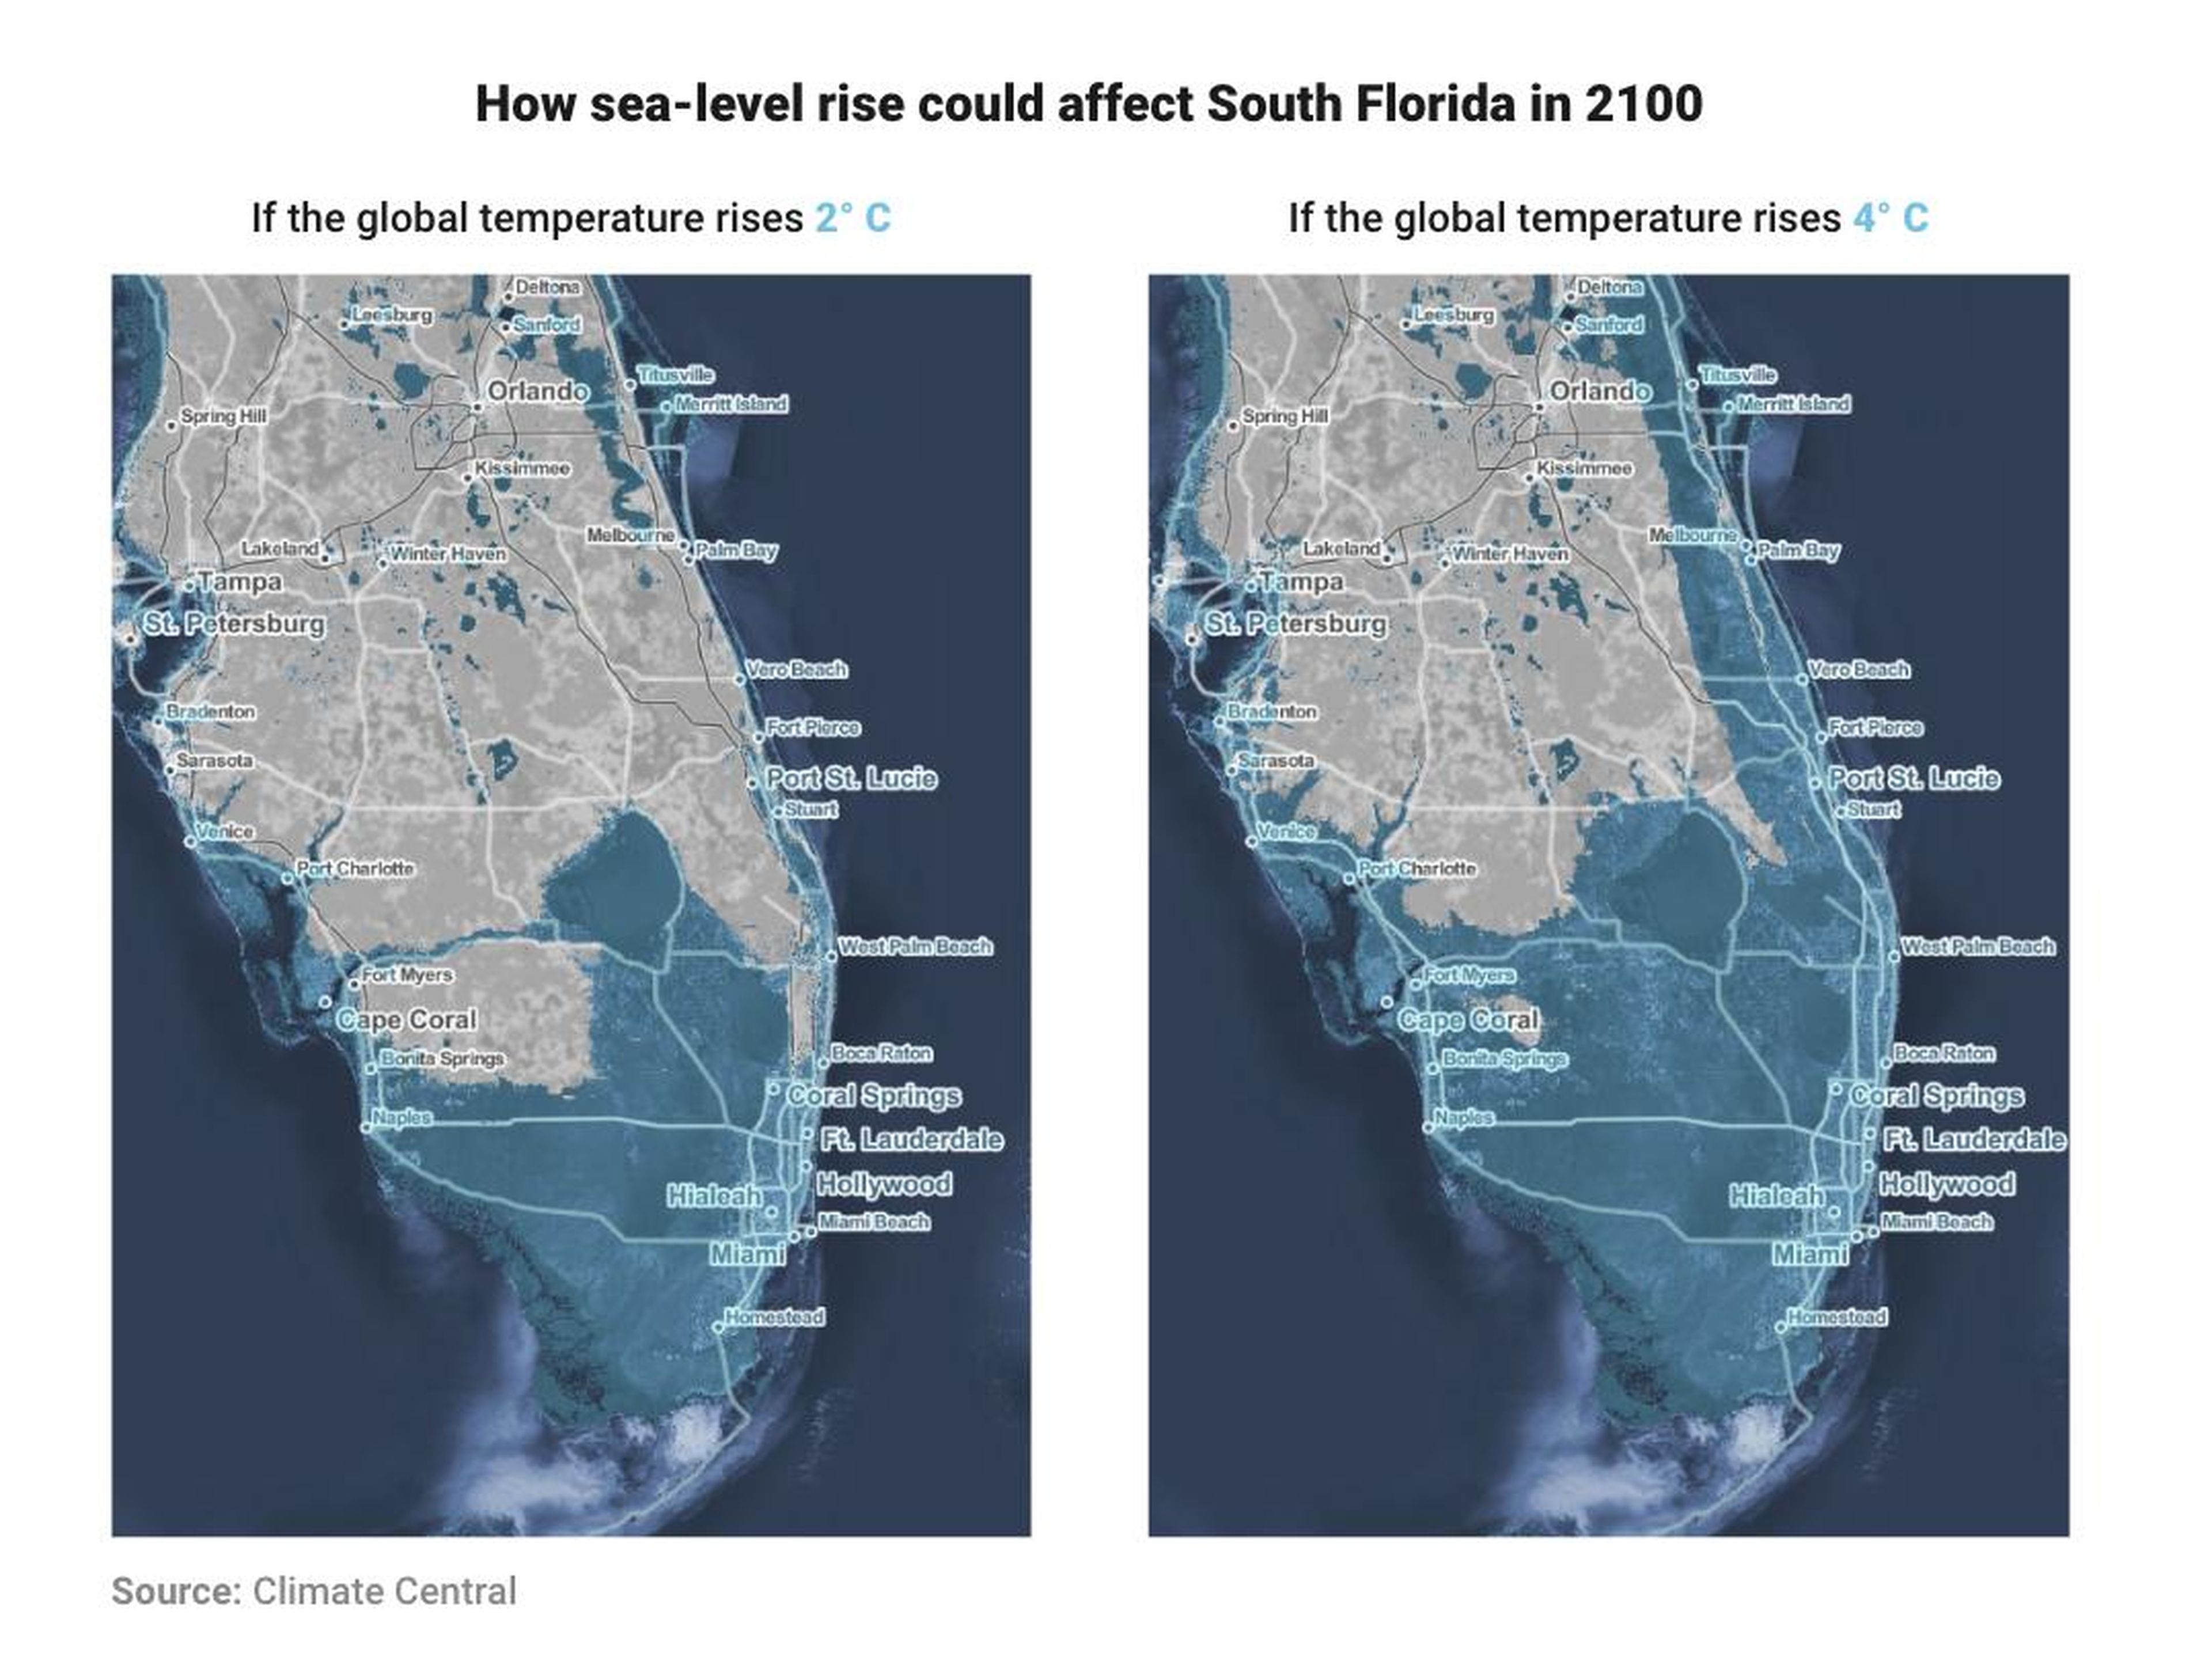 The world's coastlines may be unrecognizable by 2100, even with moderate sea-level rise.